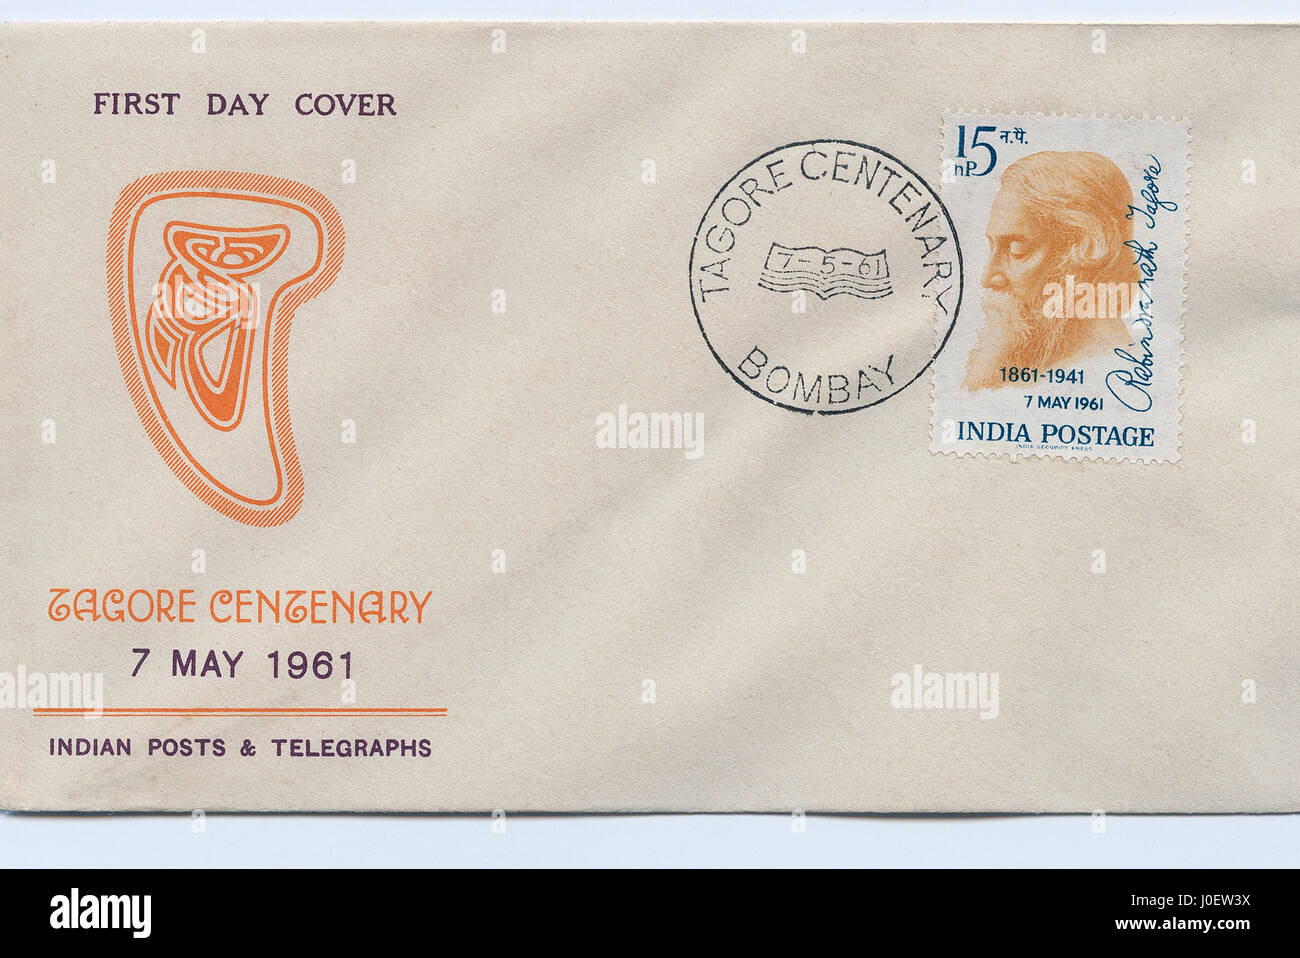 First day cover of tagore centenary, india, asia Stock Photo